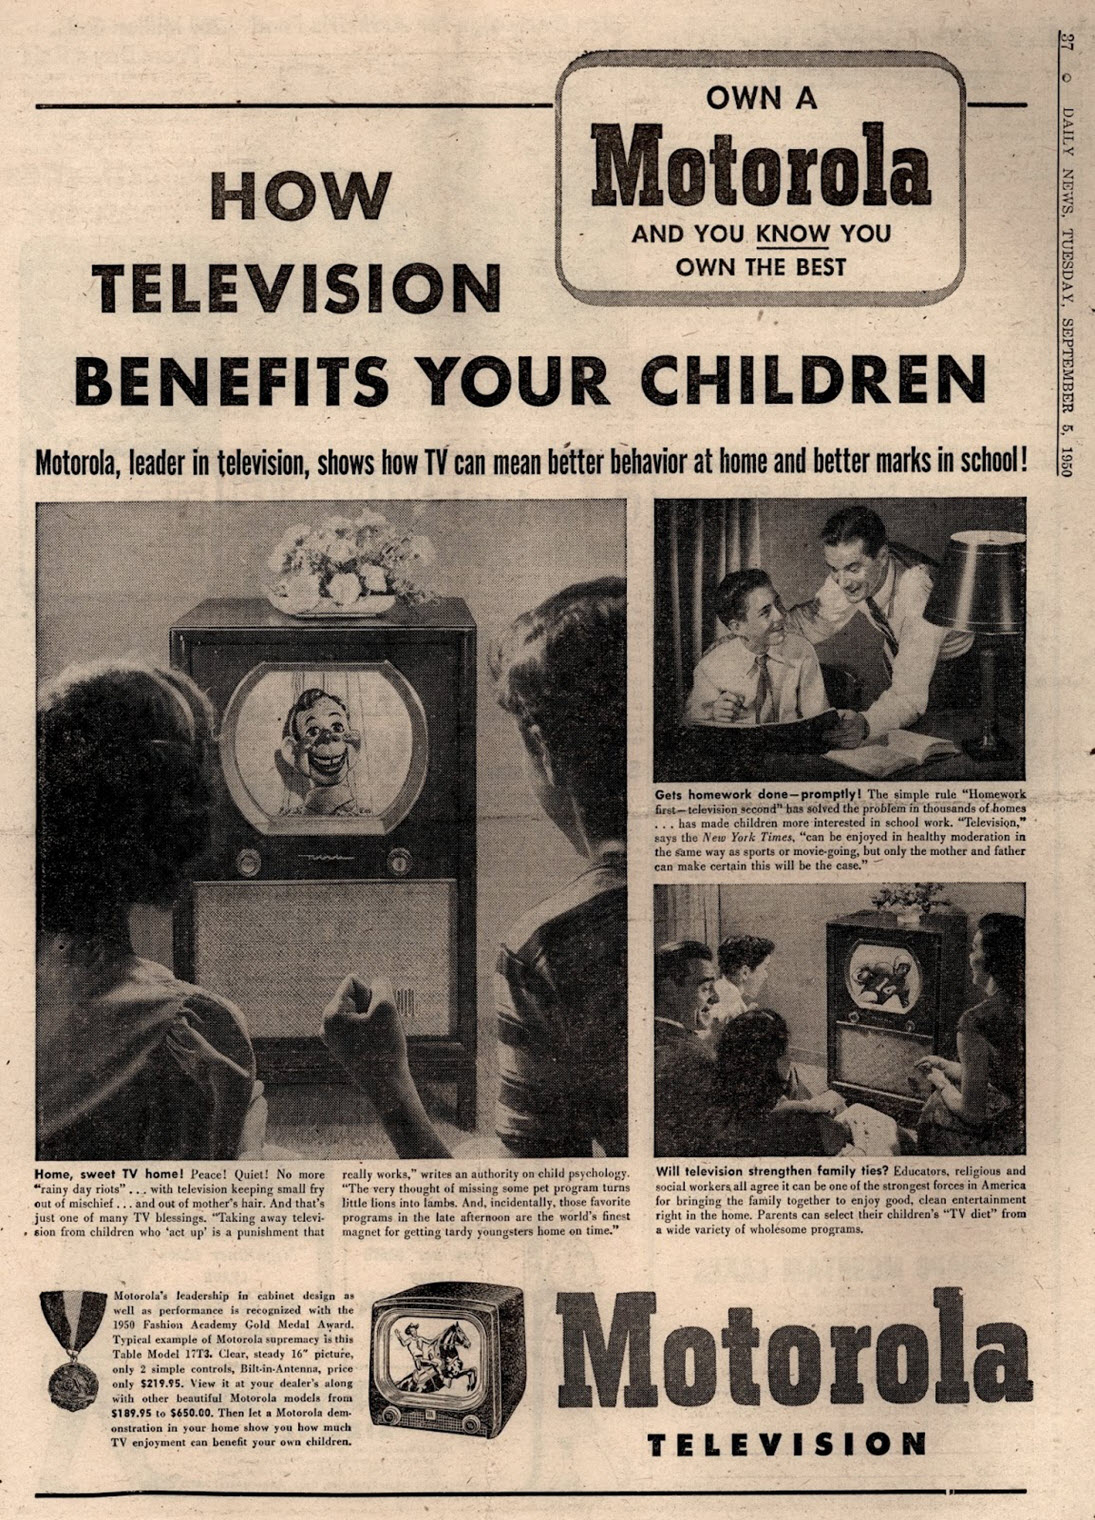 vintage ads - Own A How Motorola Television Benefits Your Children And You Know You Own The Best Motorola, leader in television, shows how Tv can mean better behavior at home and better marks in school! Motorola Television